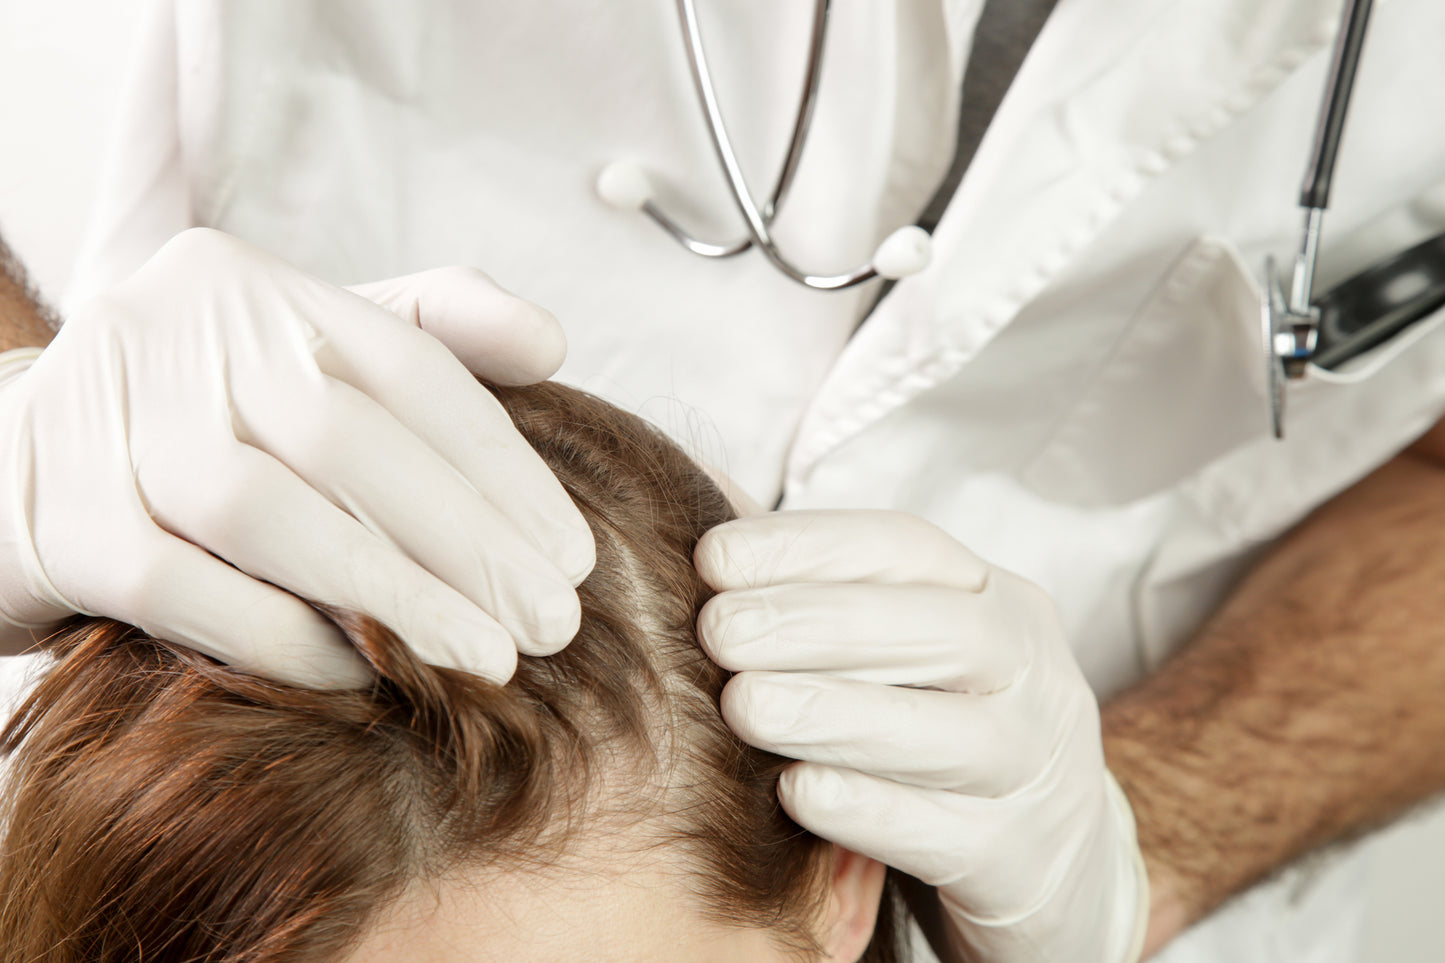 Is There a Connection Between Cholesterol Levels and Hair Loss?